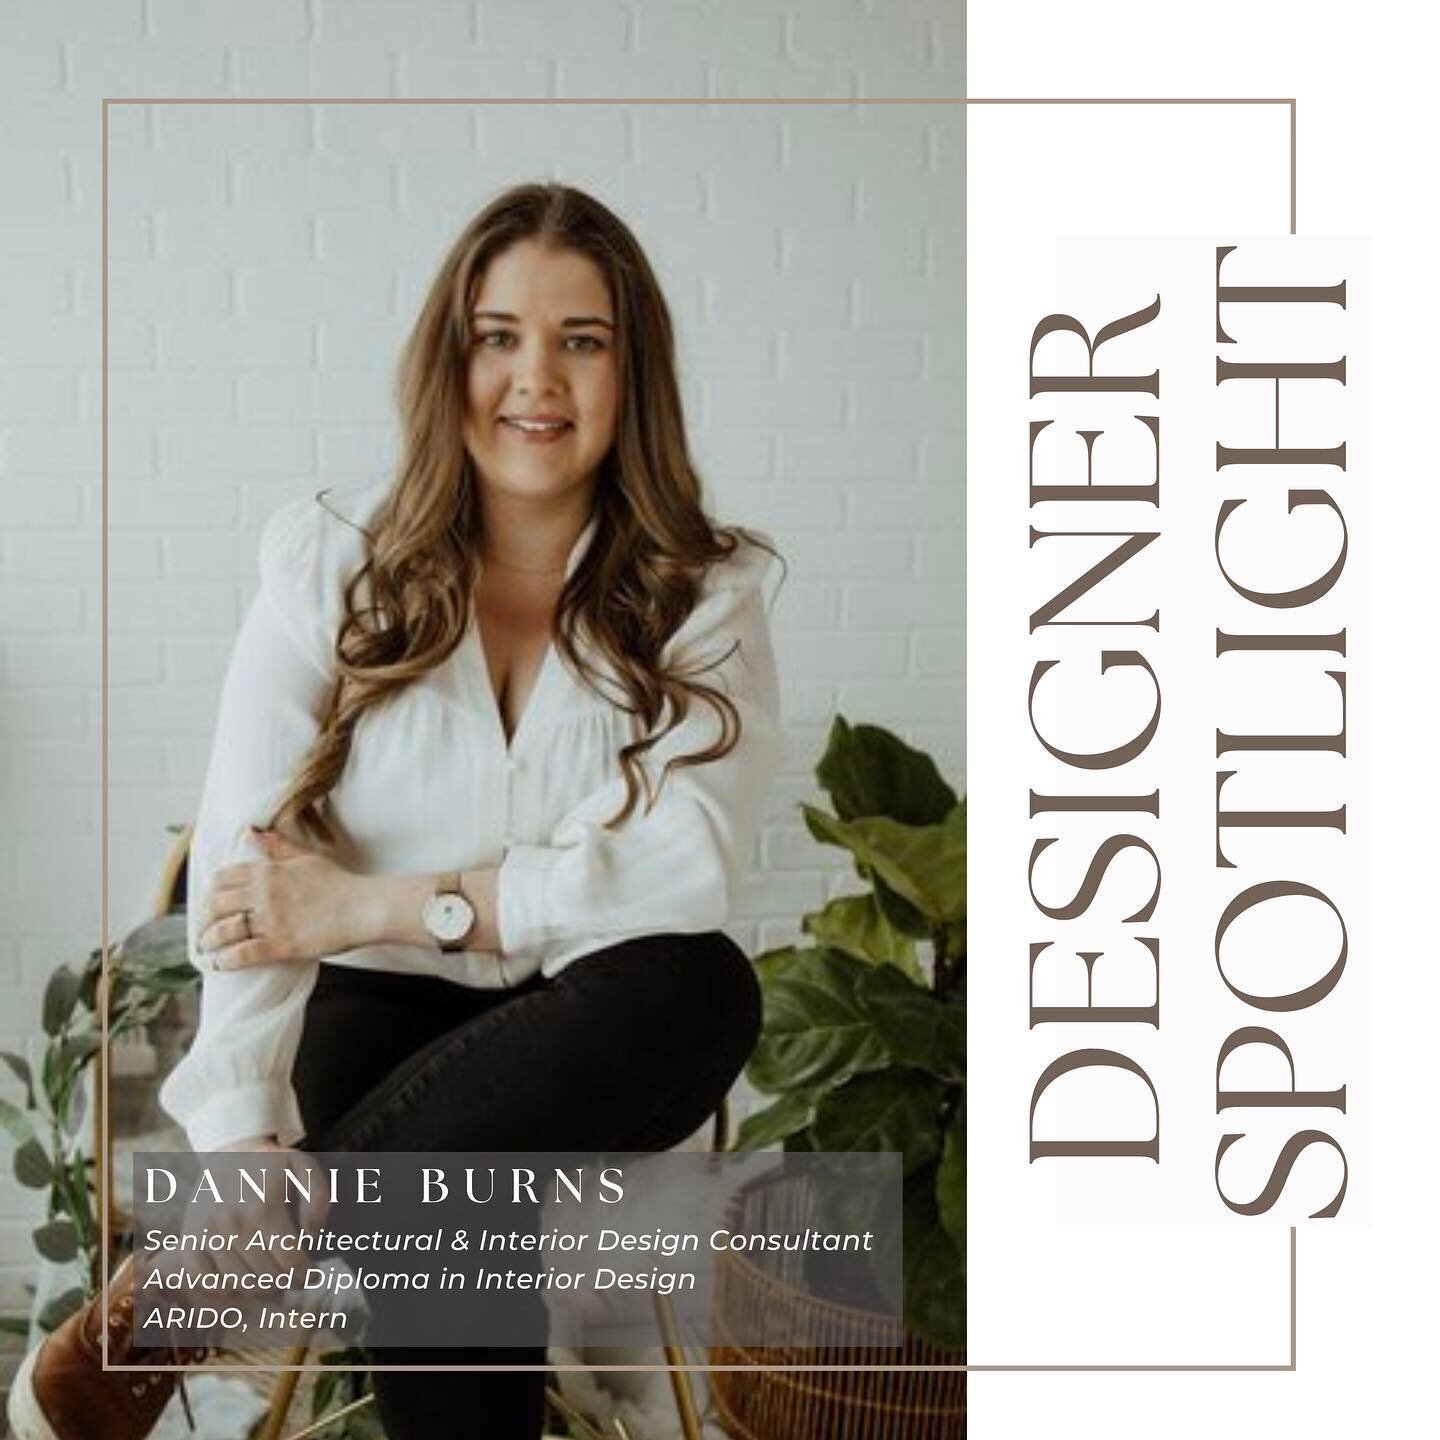 DESIGNER SPOTLIGHT! ✨Dannie is an interior and architectural designer with an advanced diploma in Interior Design, graduating with honors in 2015. After starting her career in the kitchen and bath industry, she joined Bailey Designs and has spent the